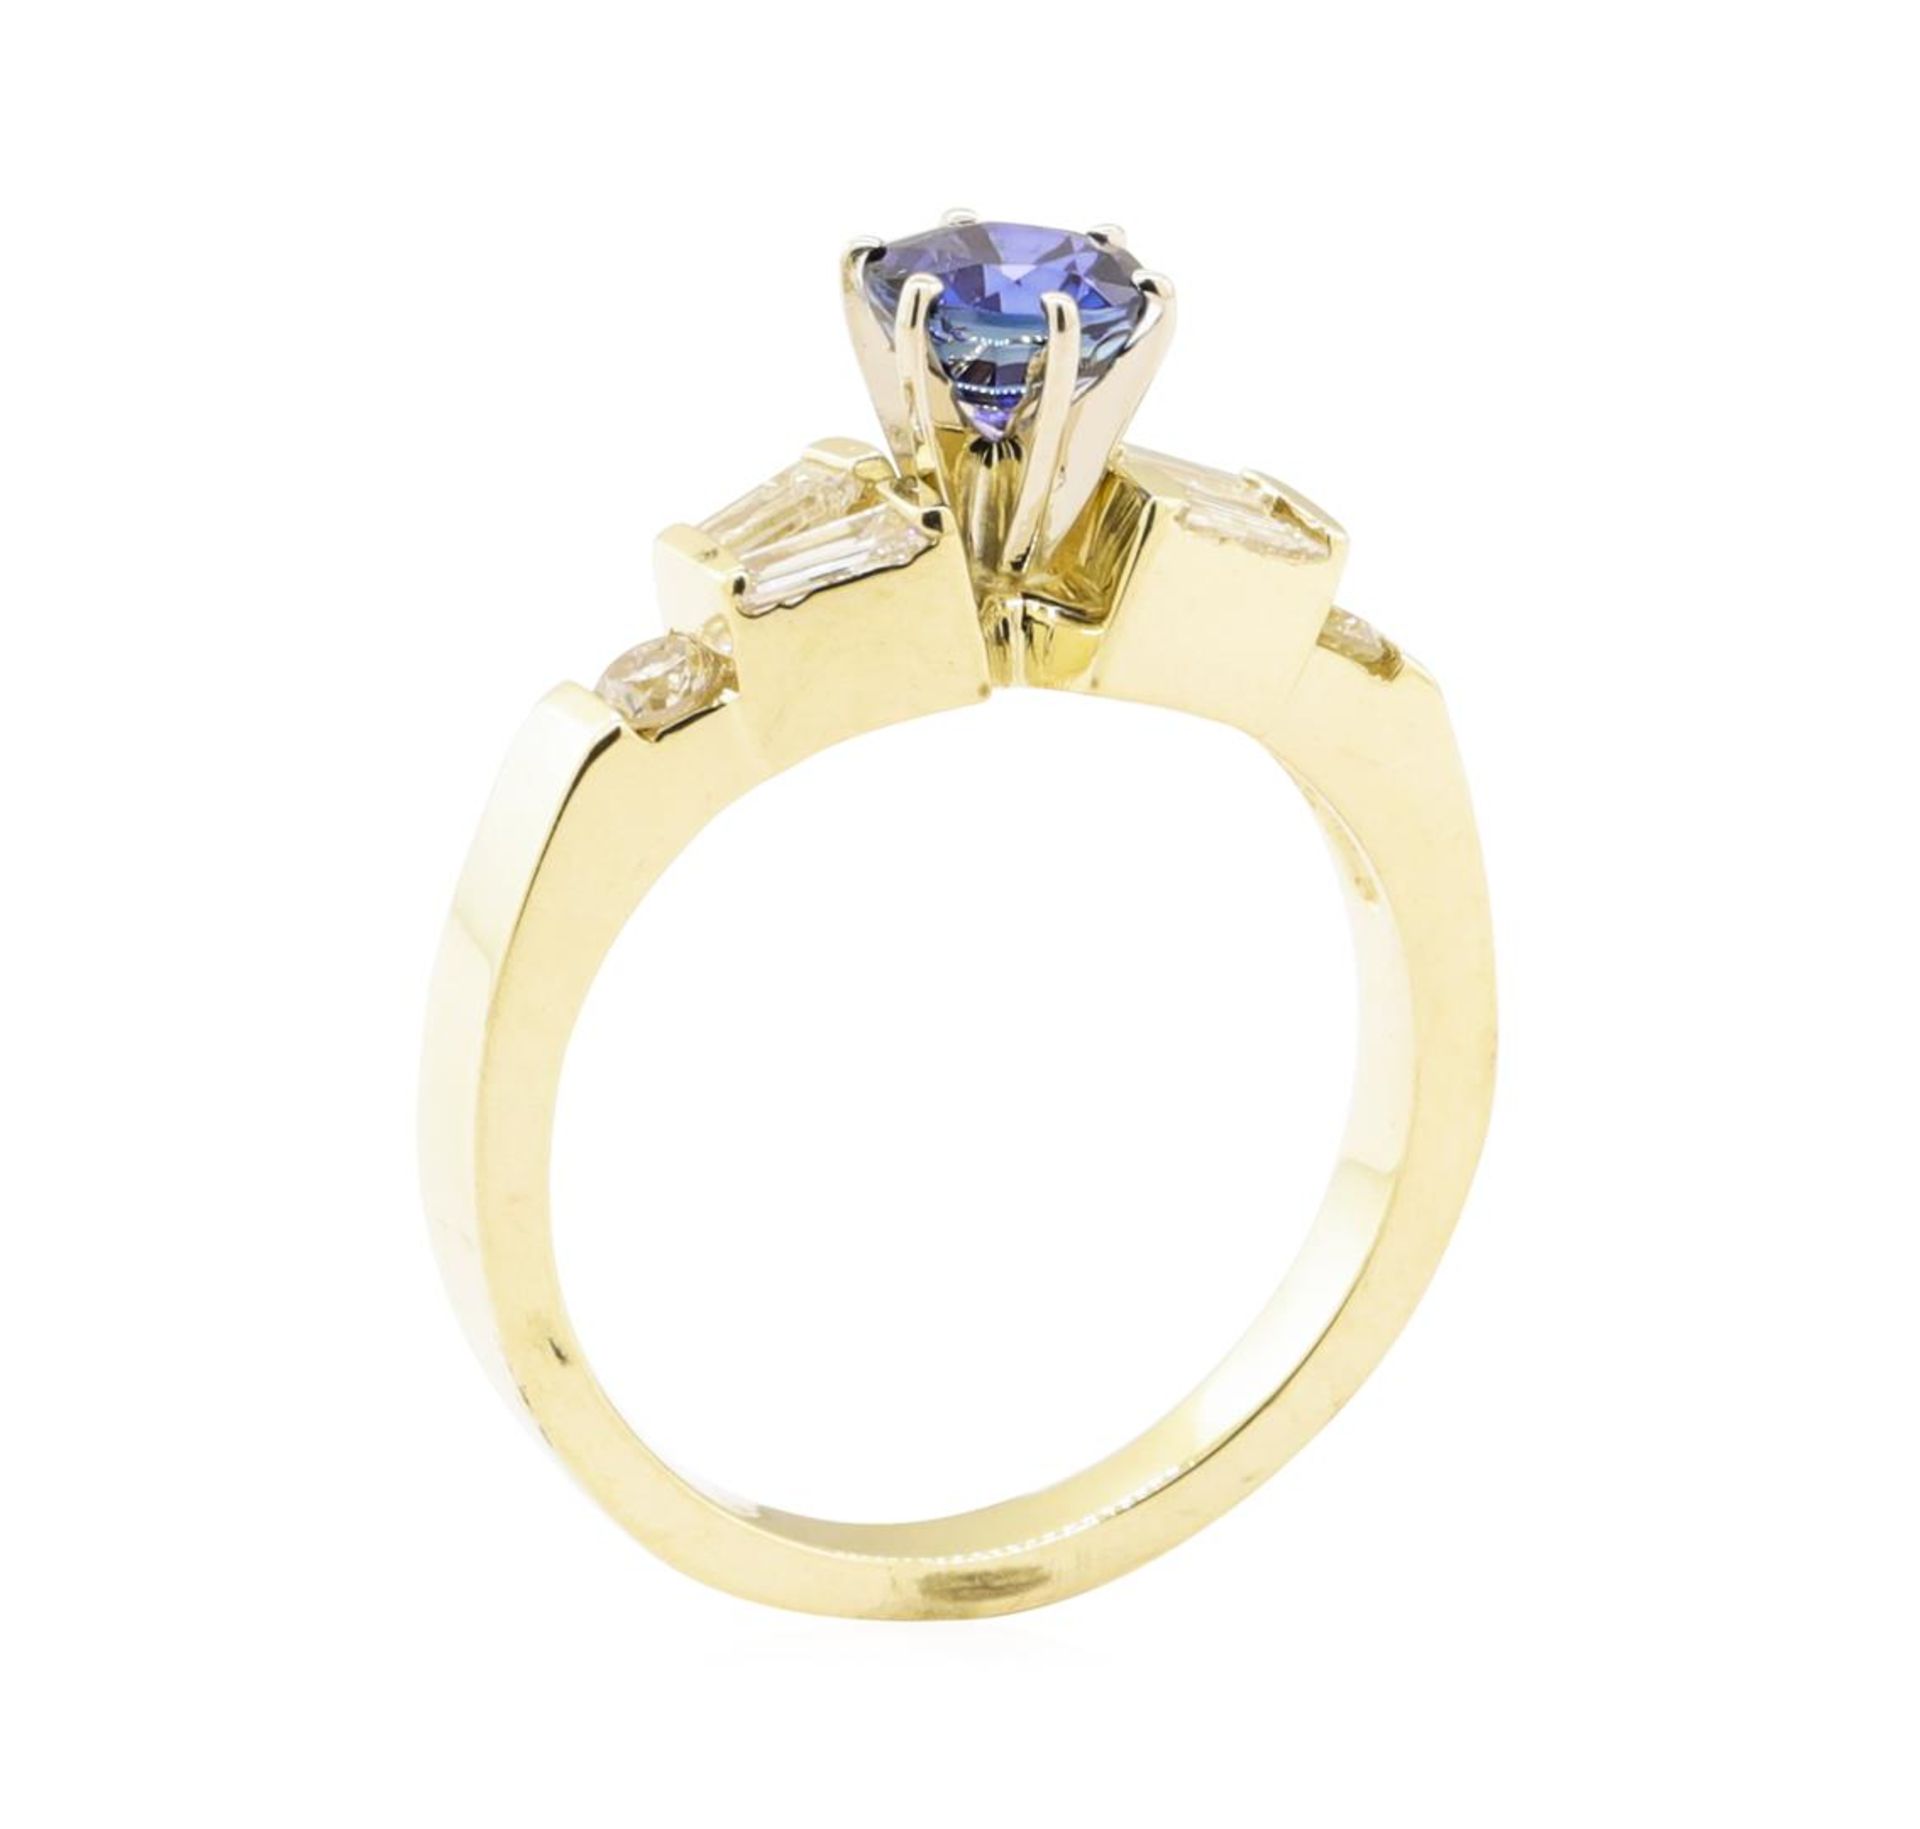 1.40 ctw Blue Sapphire And Diamond Ring - 14KT Yellow Gold - Image 4 of 5